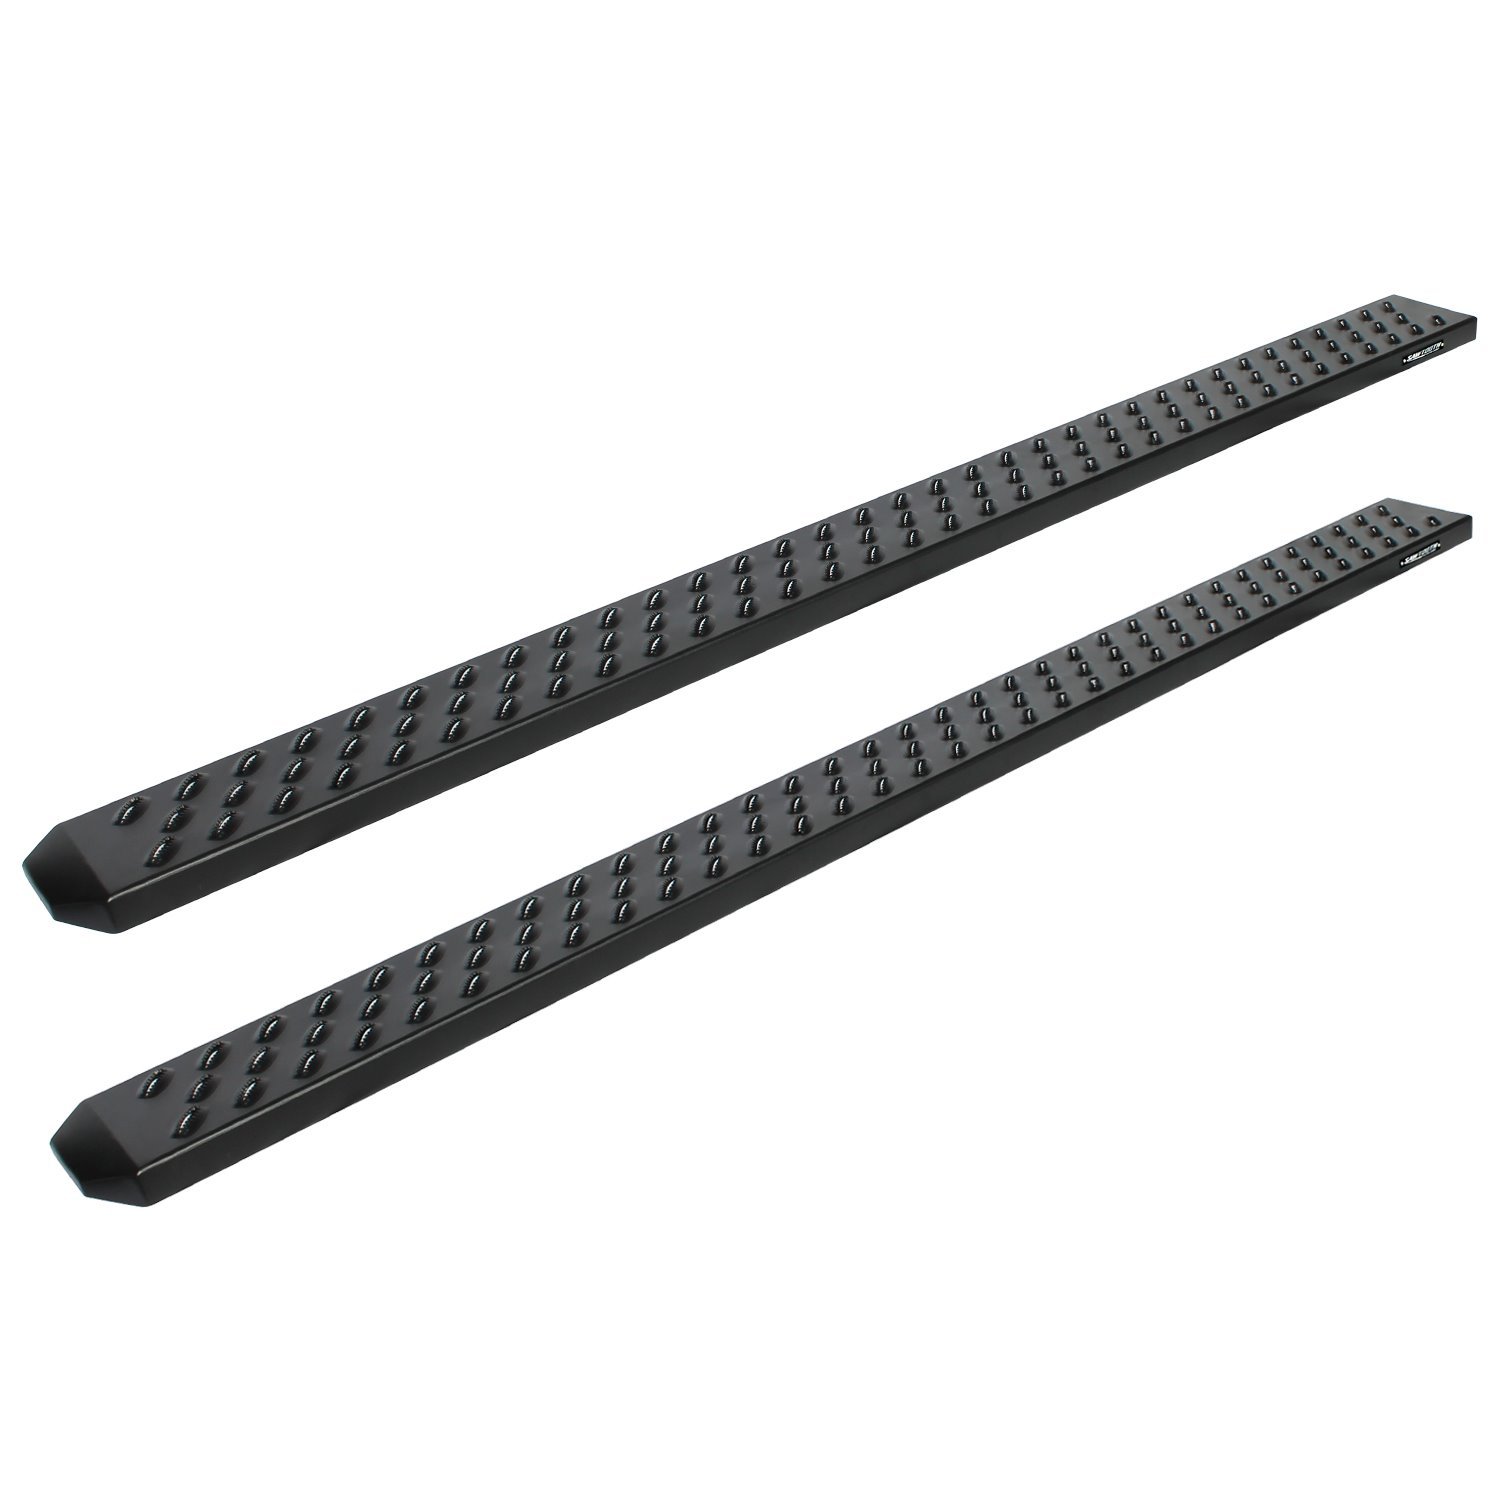 2102-0501BT 6.5 in Sawtooth Slide Track Running Boards, Black Aluminum, Fits Select Dodge Ram 1500 New Body Style